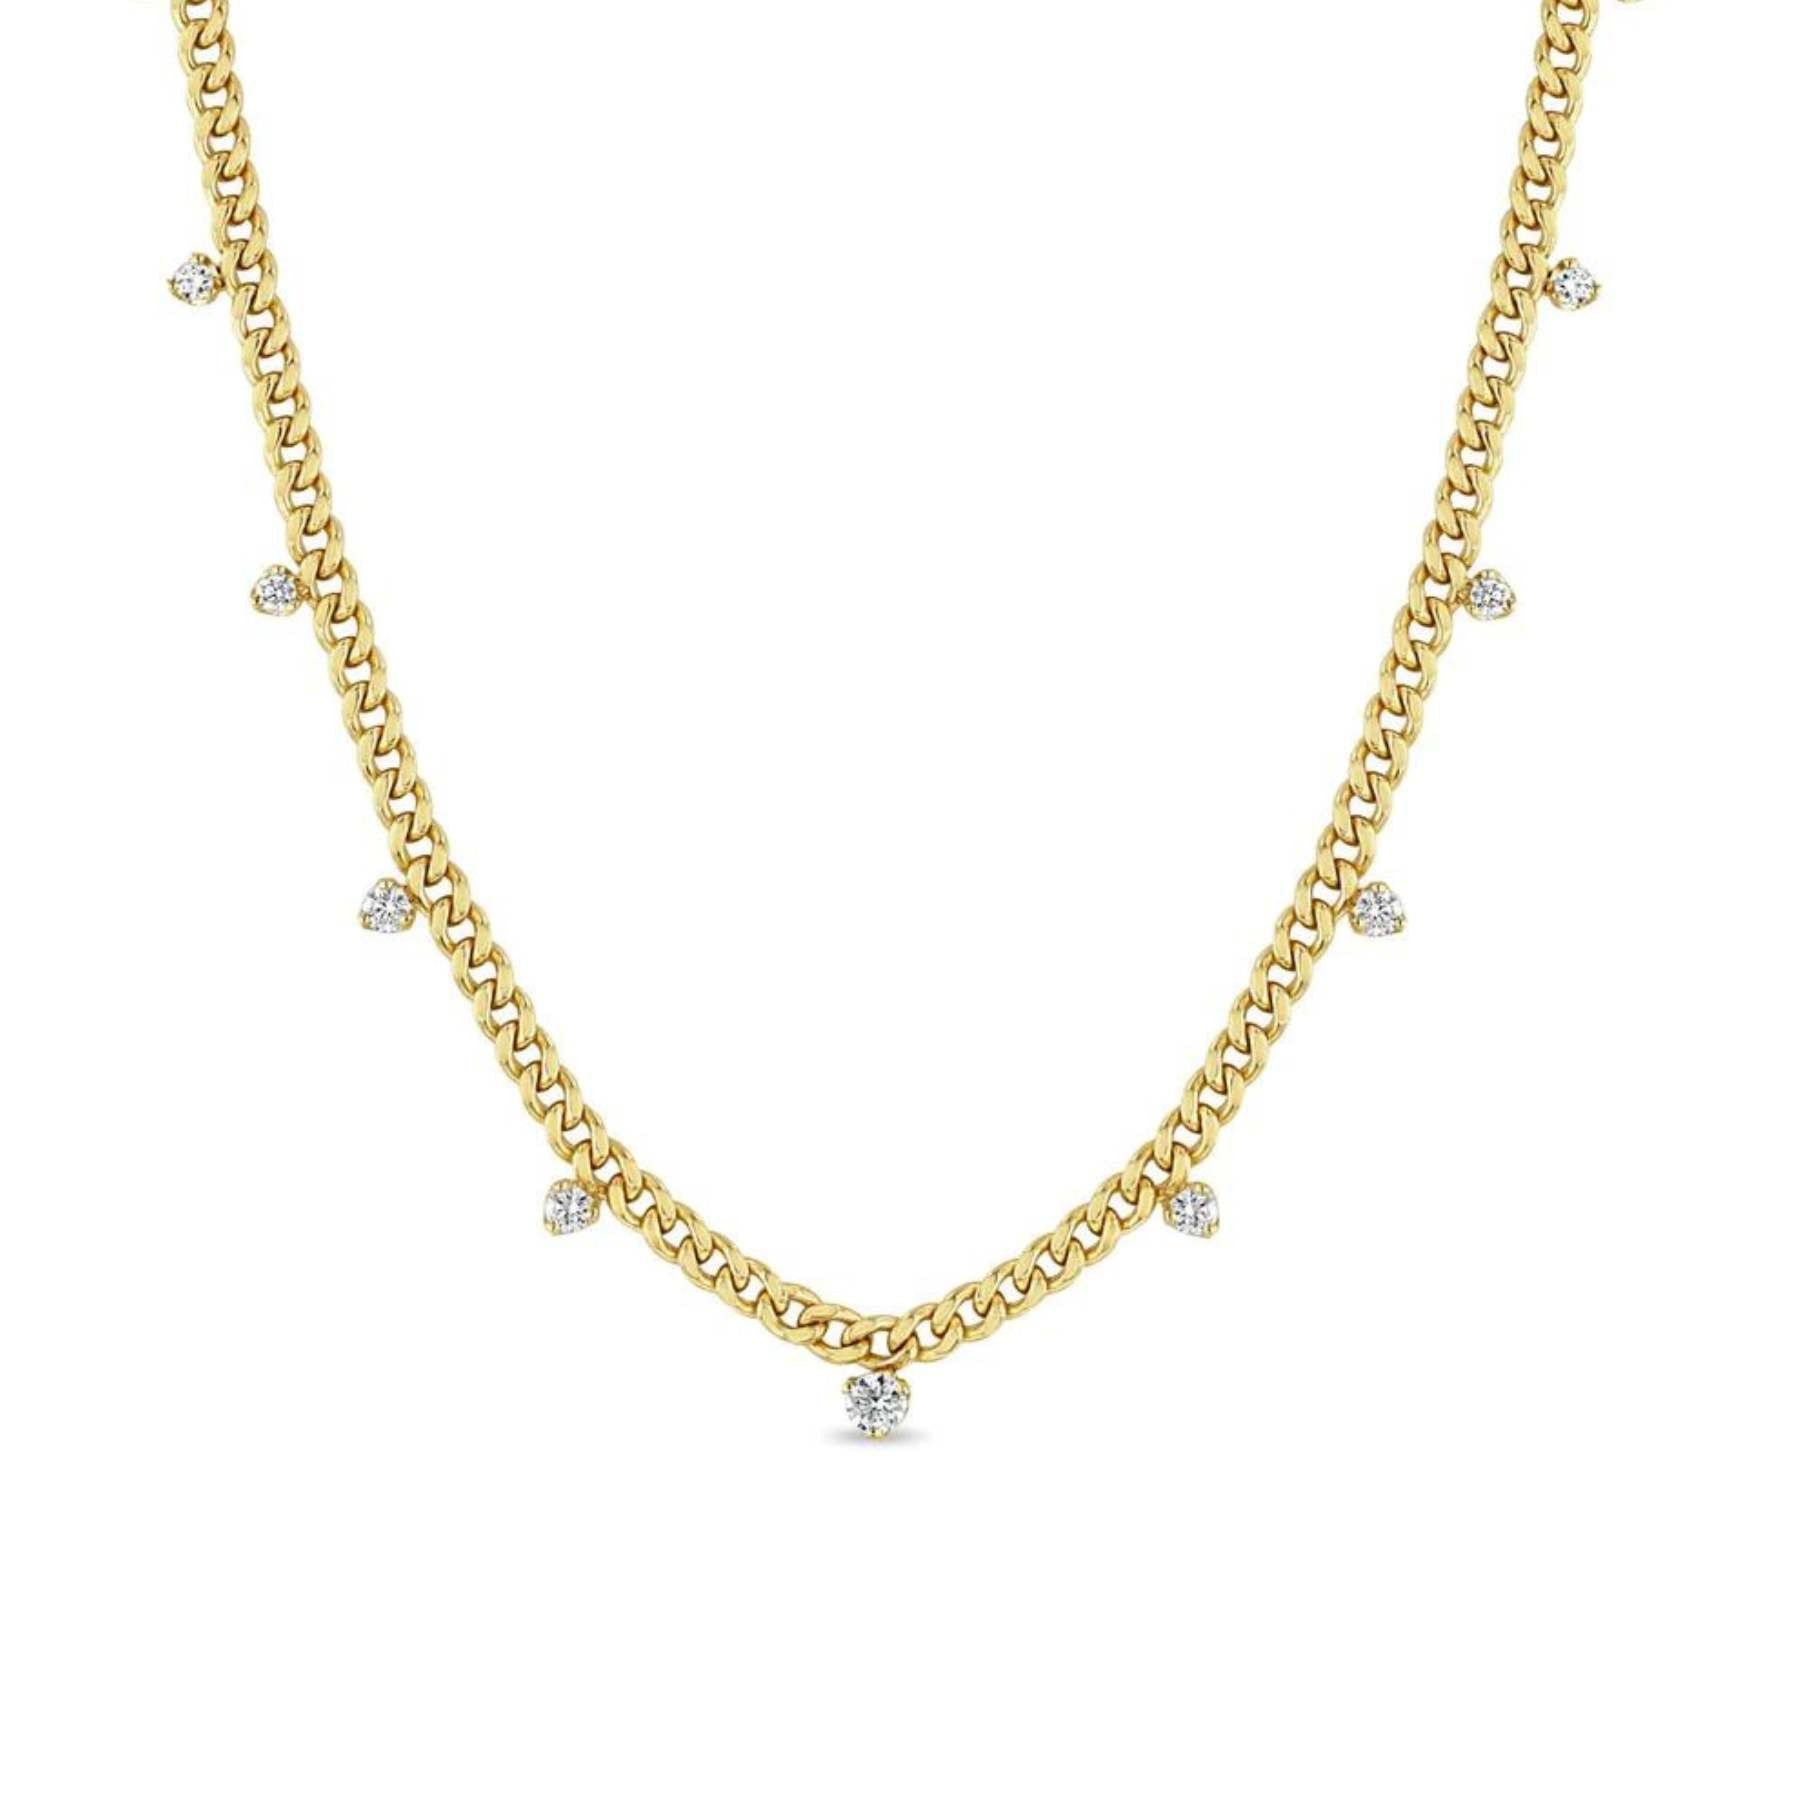 Zoe Chicco 14k - 11 Graduated Prong Diamond Small Curb Chain Necklace